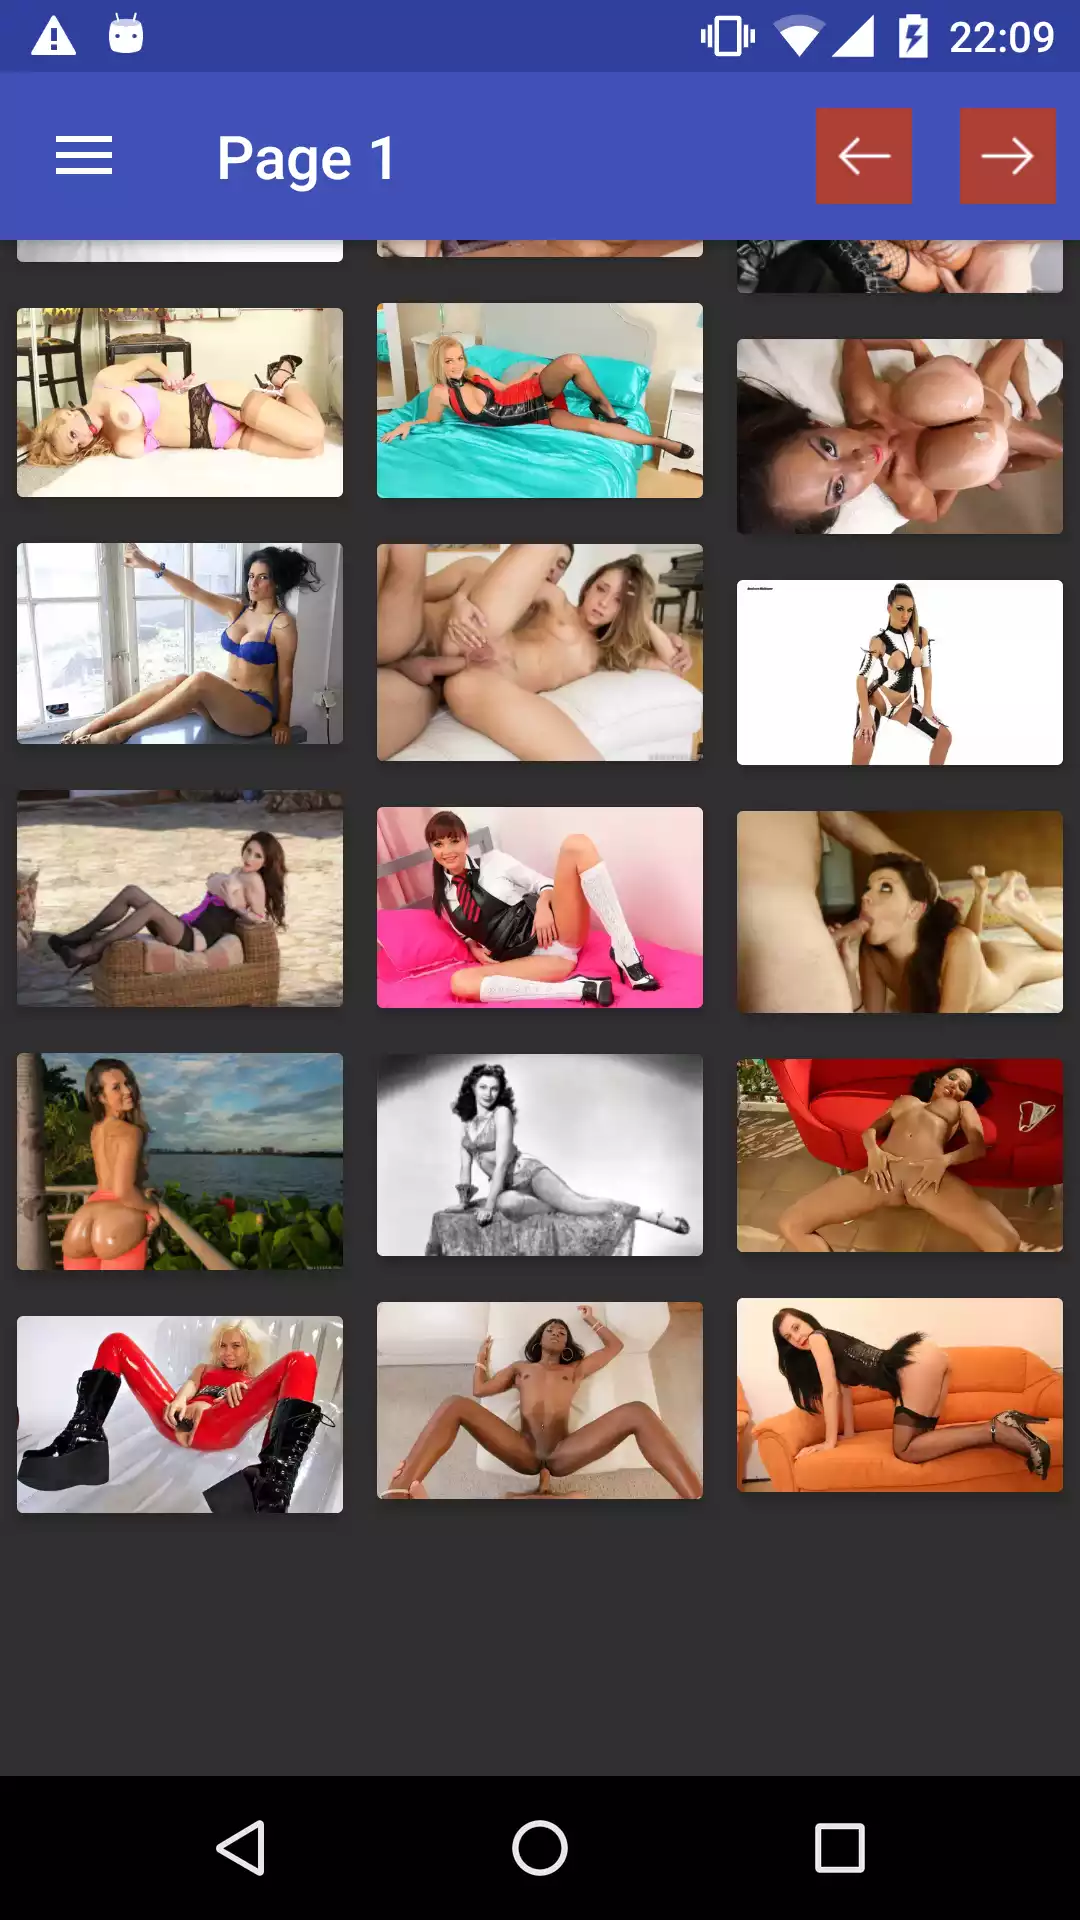 Pornstar Wallpapers 2 best,app,henti,sexy,gallery,henati,upskirt,apps,pictures,hentai,pics,pornstar,wallpapers,hot,porn,top,photos,android,download,picture,hntai